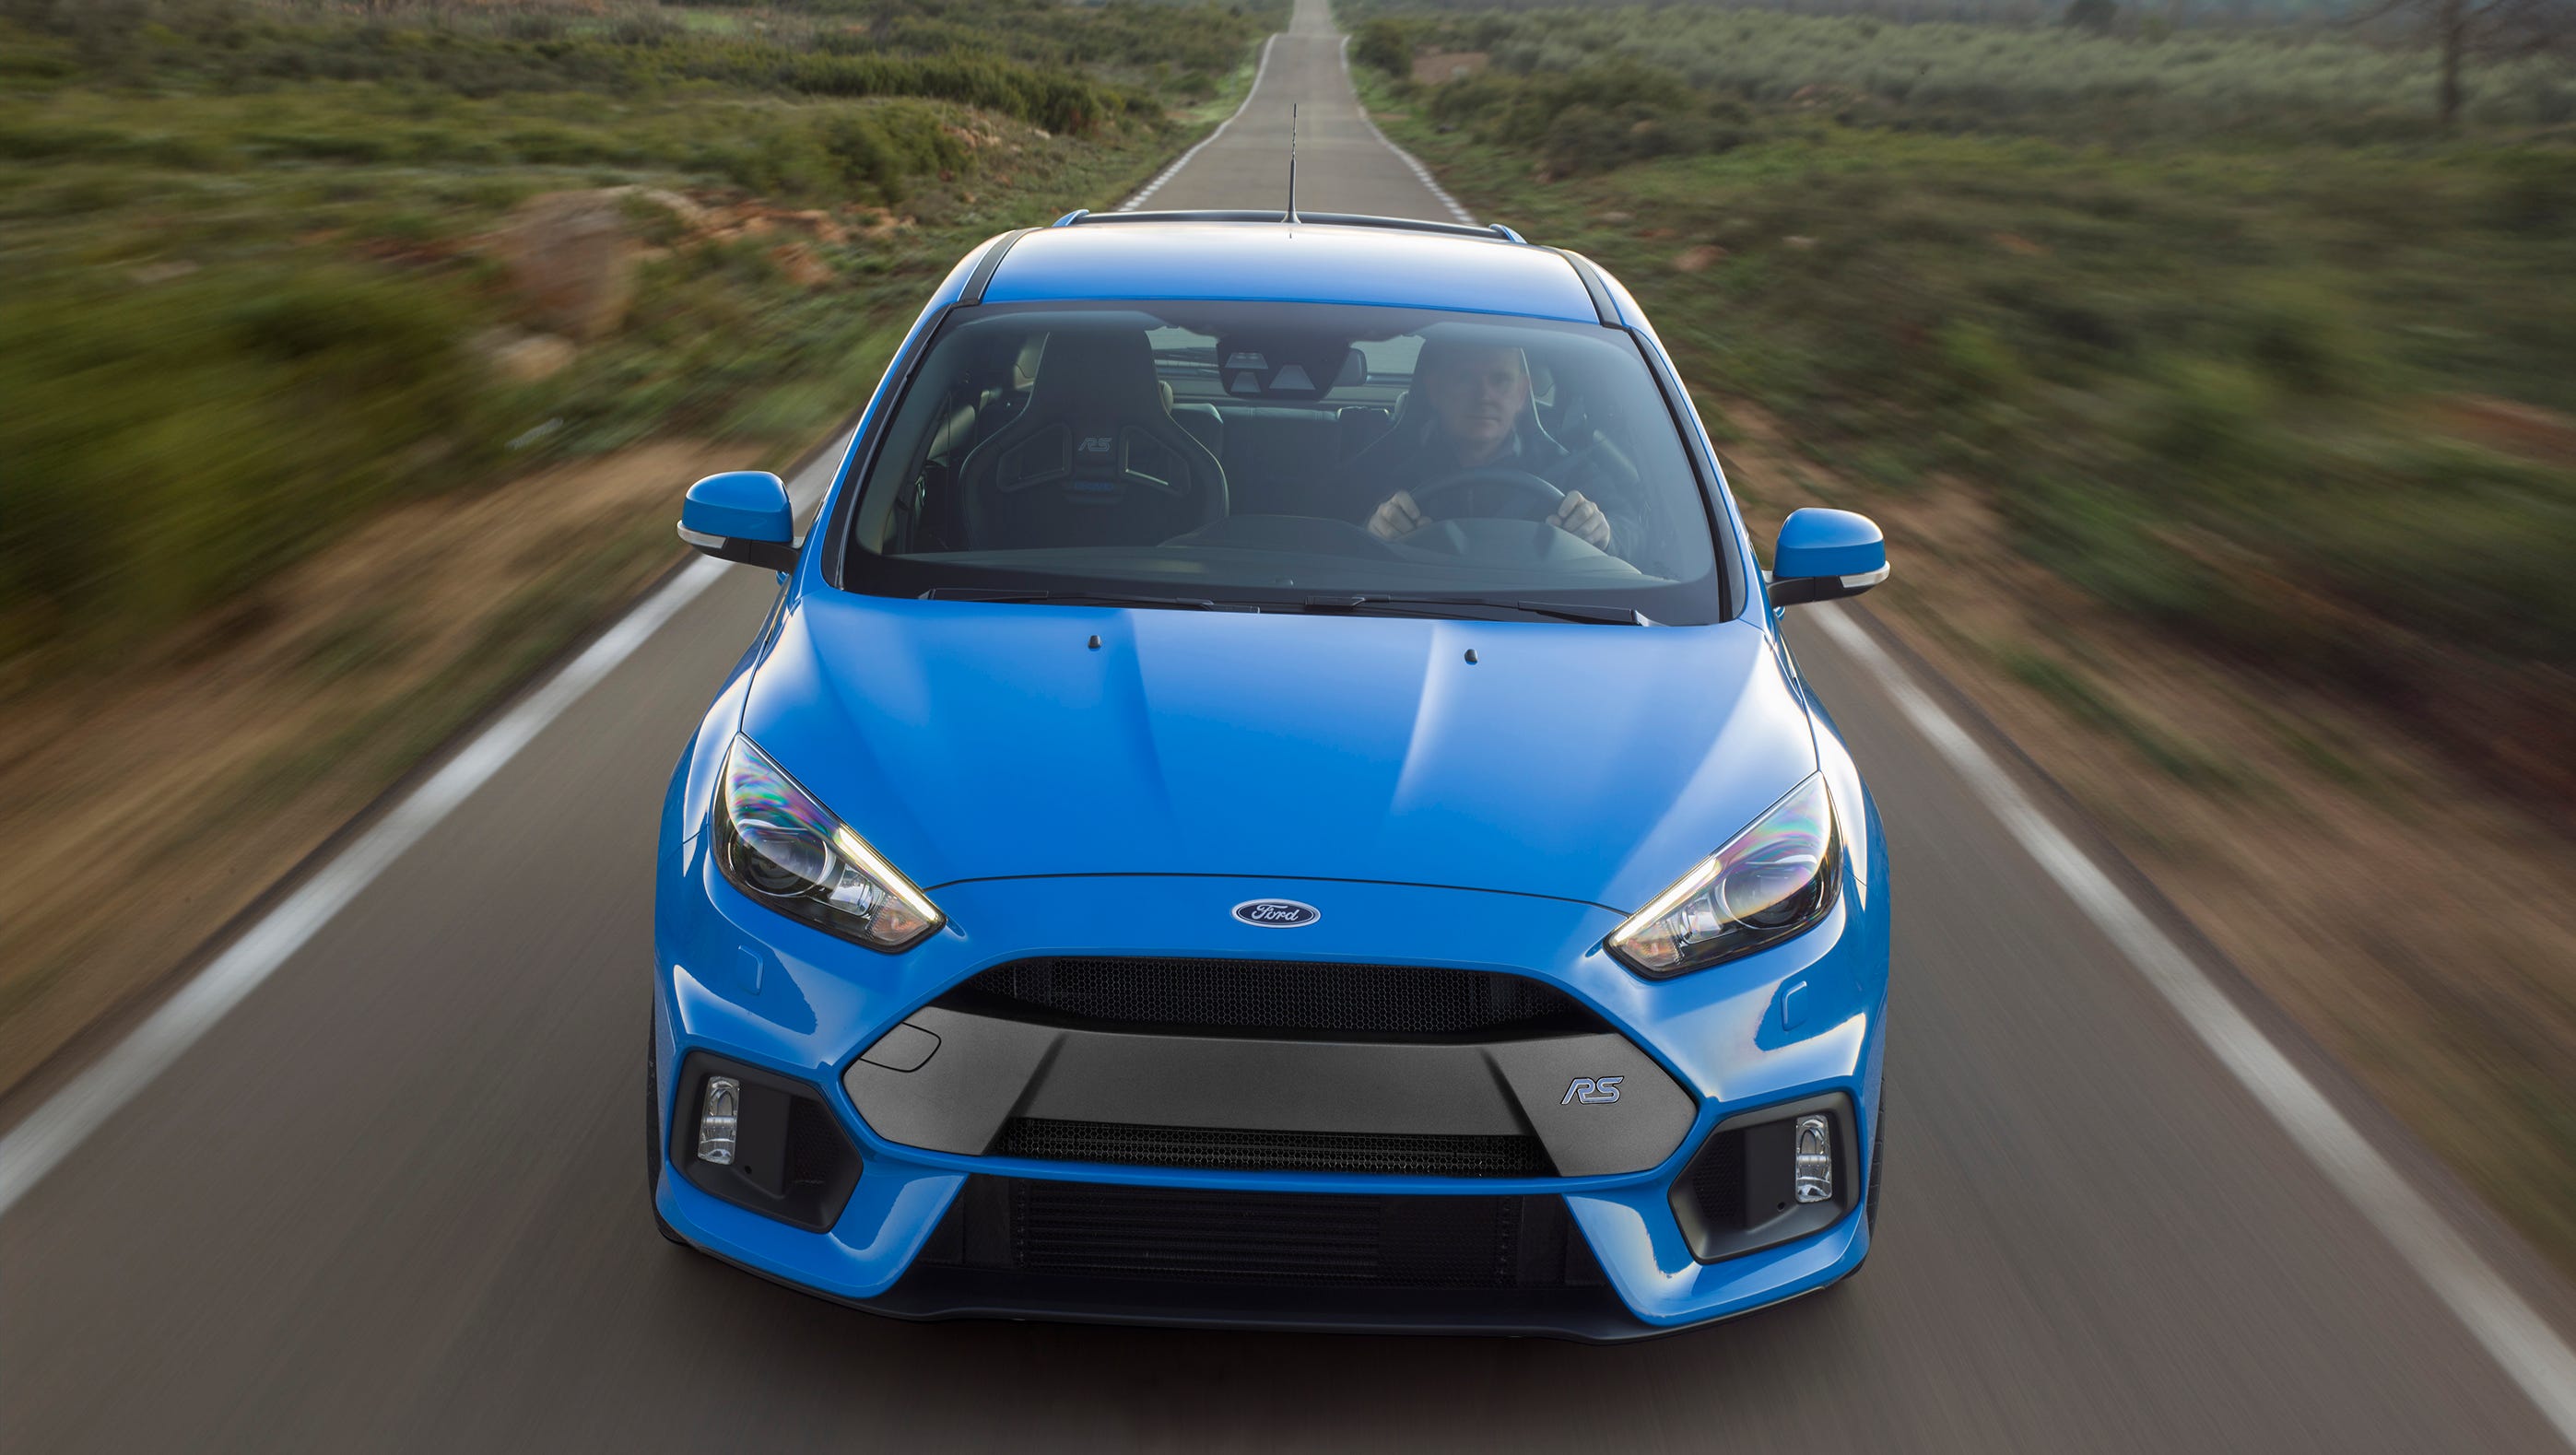 Review: Sizzling Ford Focus RS cooks other hot compacts